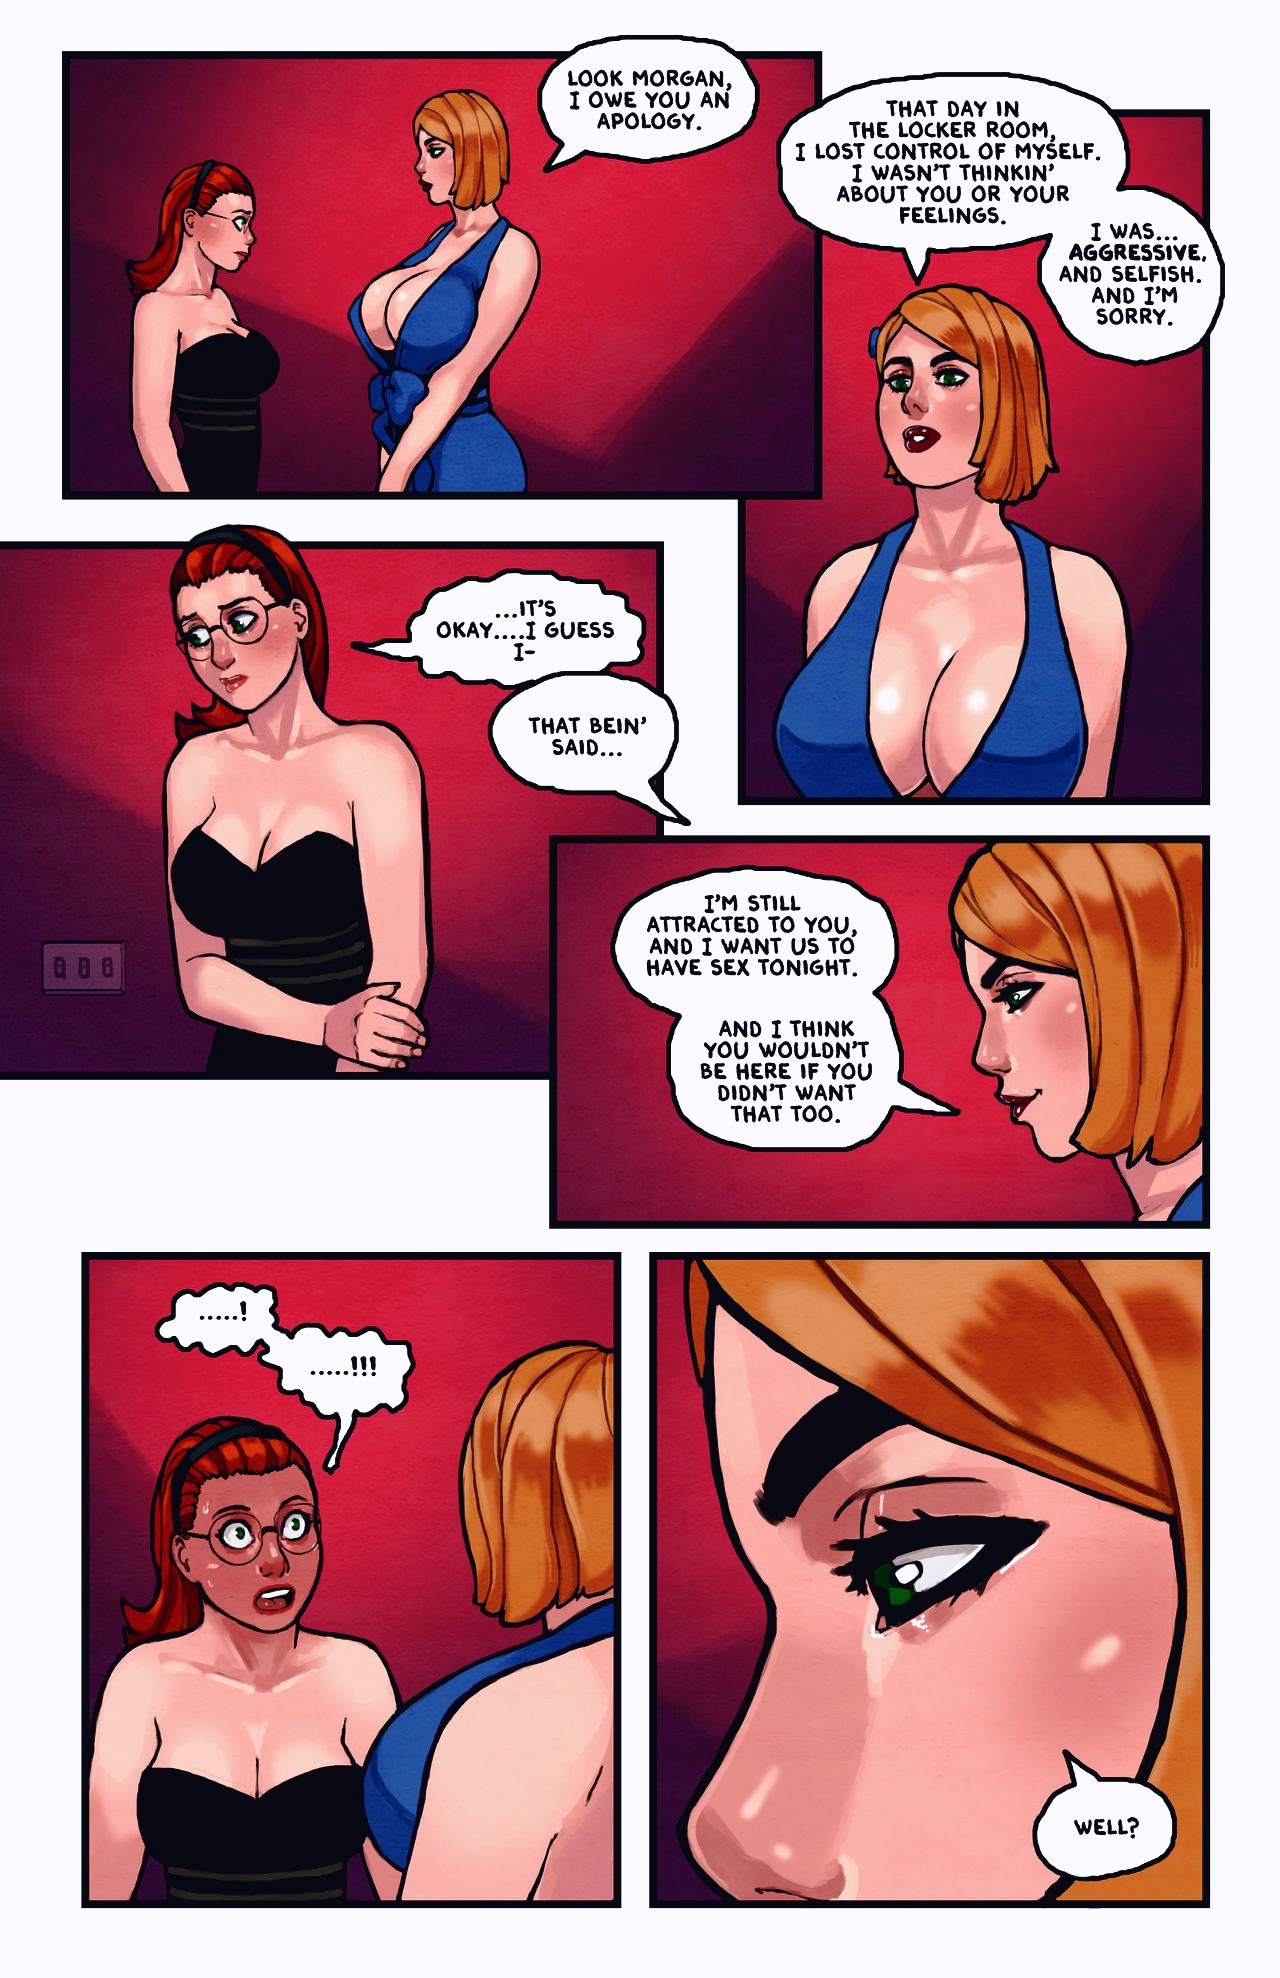 This Romantic World page 072